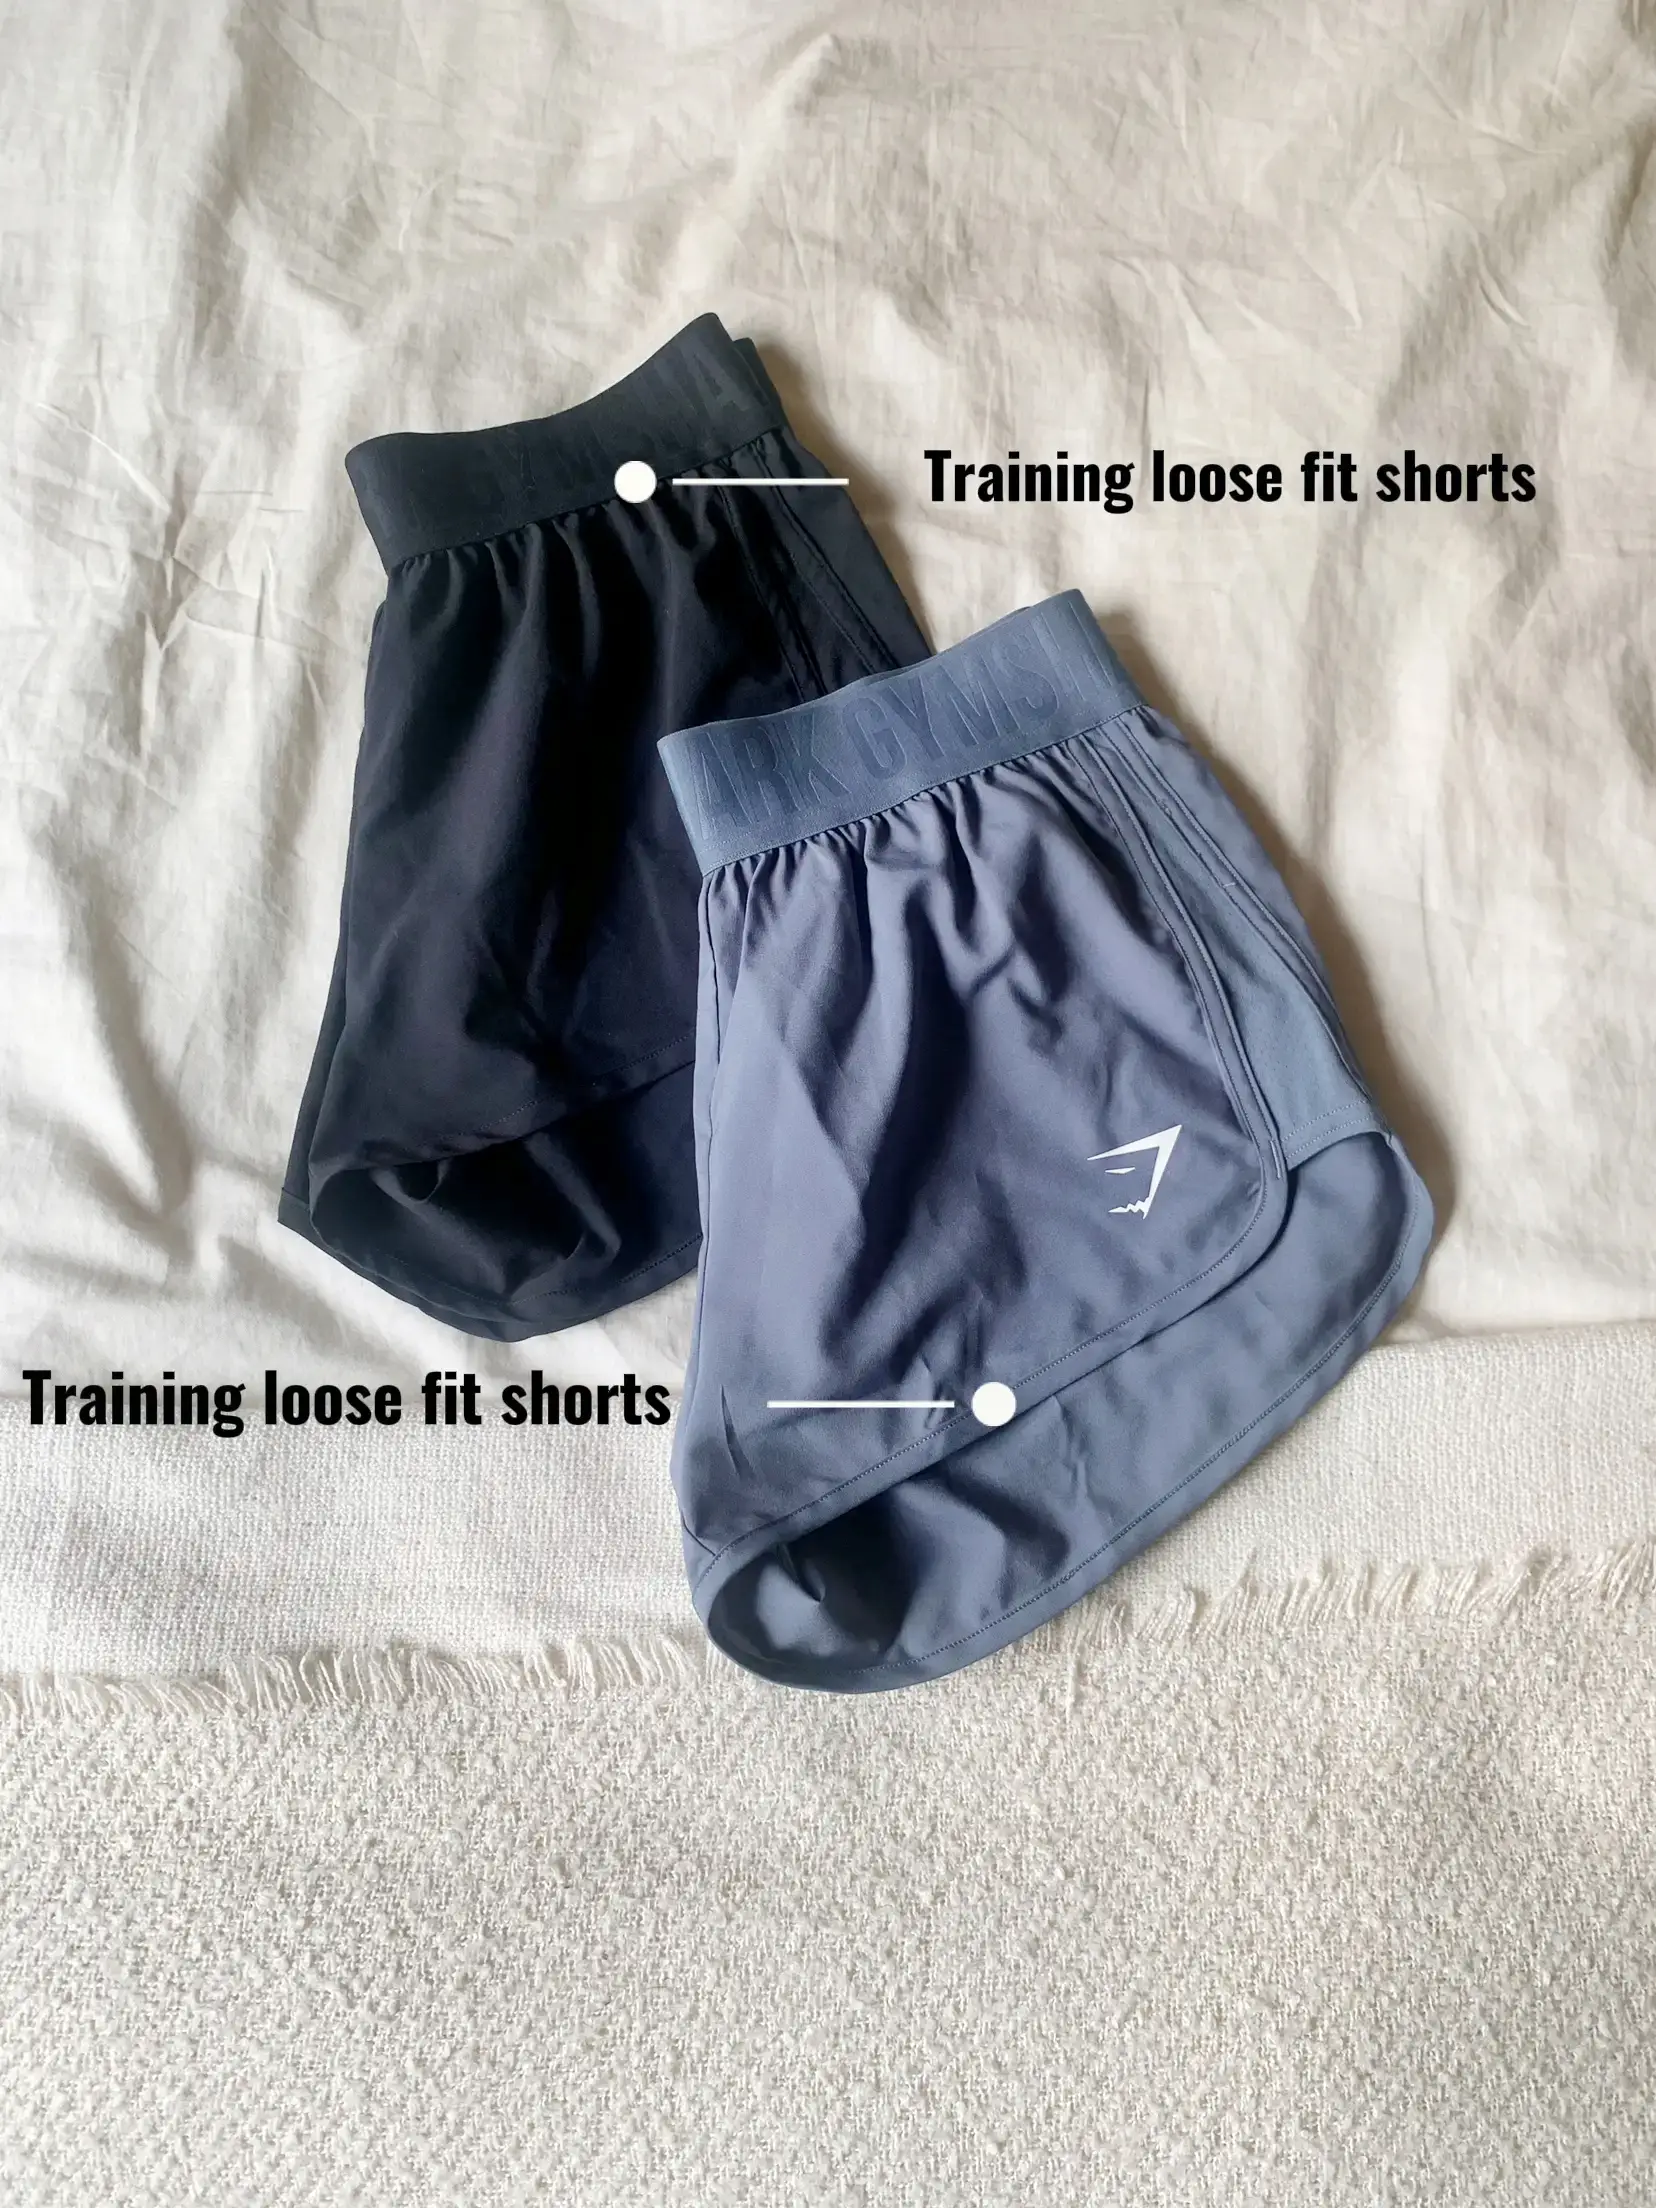 GYMSHARK VITAL SEAMLESS 2.0 2-IN-1 SHORTS ATHLETIC WORKOUT GYM SHORTS,  COLOR IS